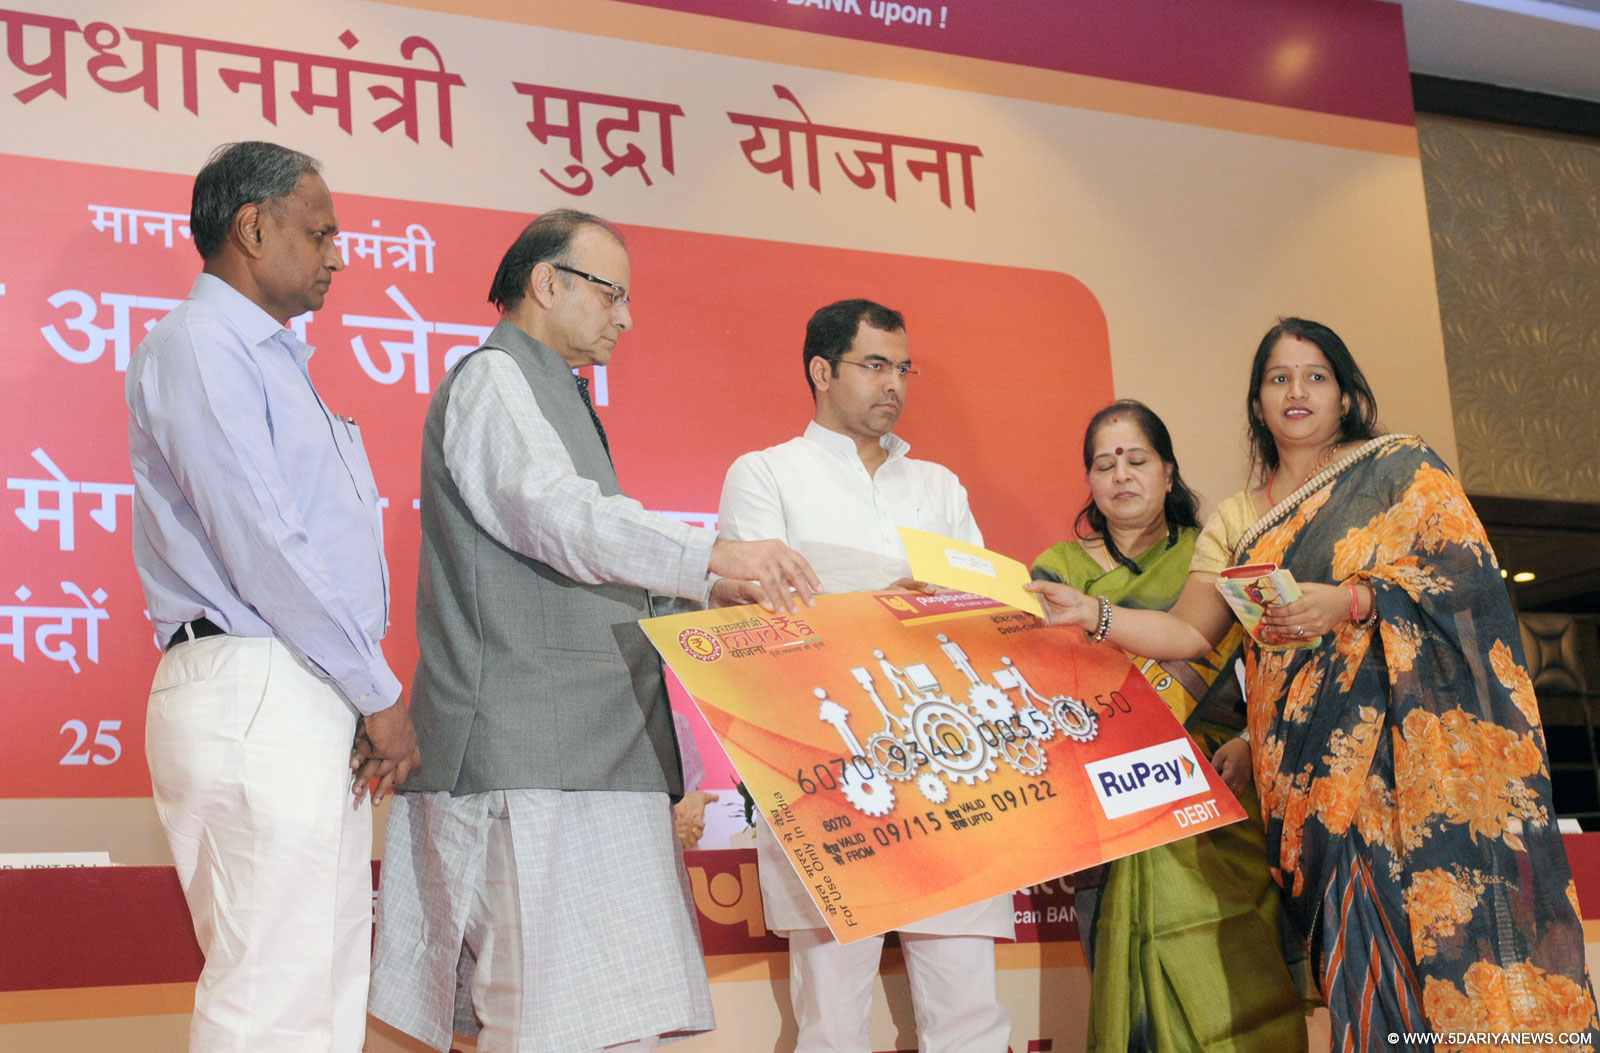 The Union Minister for Finance, Corporate Affairs and Information & Broadcasting, Shri Arun Jaitley handing over the loan sanction letters to micro entrepreneurs, during a Mega Credit Campaign, organised by the Punjab National Bank, in New Delhi on September 25, 2015. Dr. Udit Raj, local Member of Parliament and the MD & CEO, Punjab National Bank, Ms. Usha Ananthasubramanian are also seen.